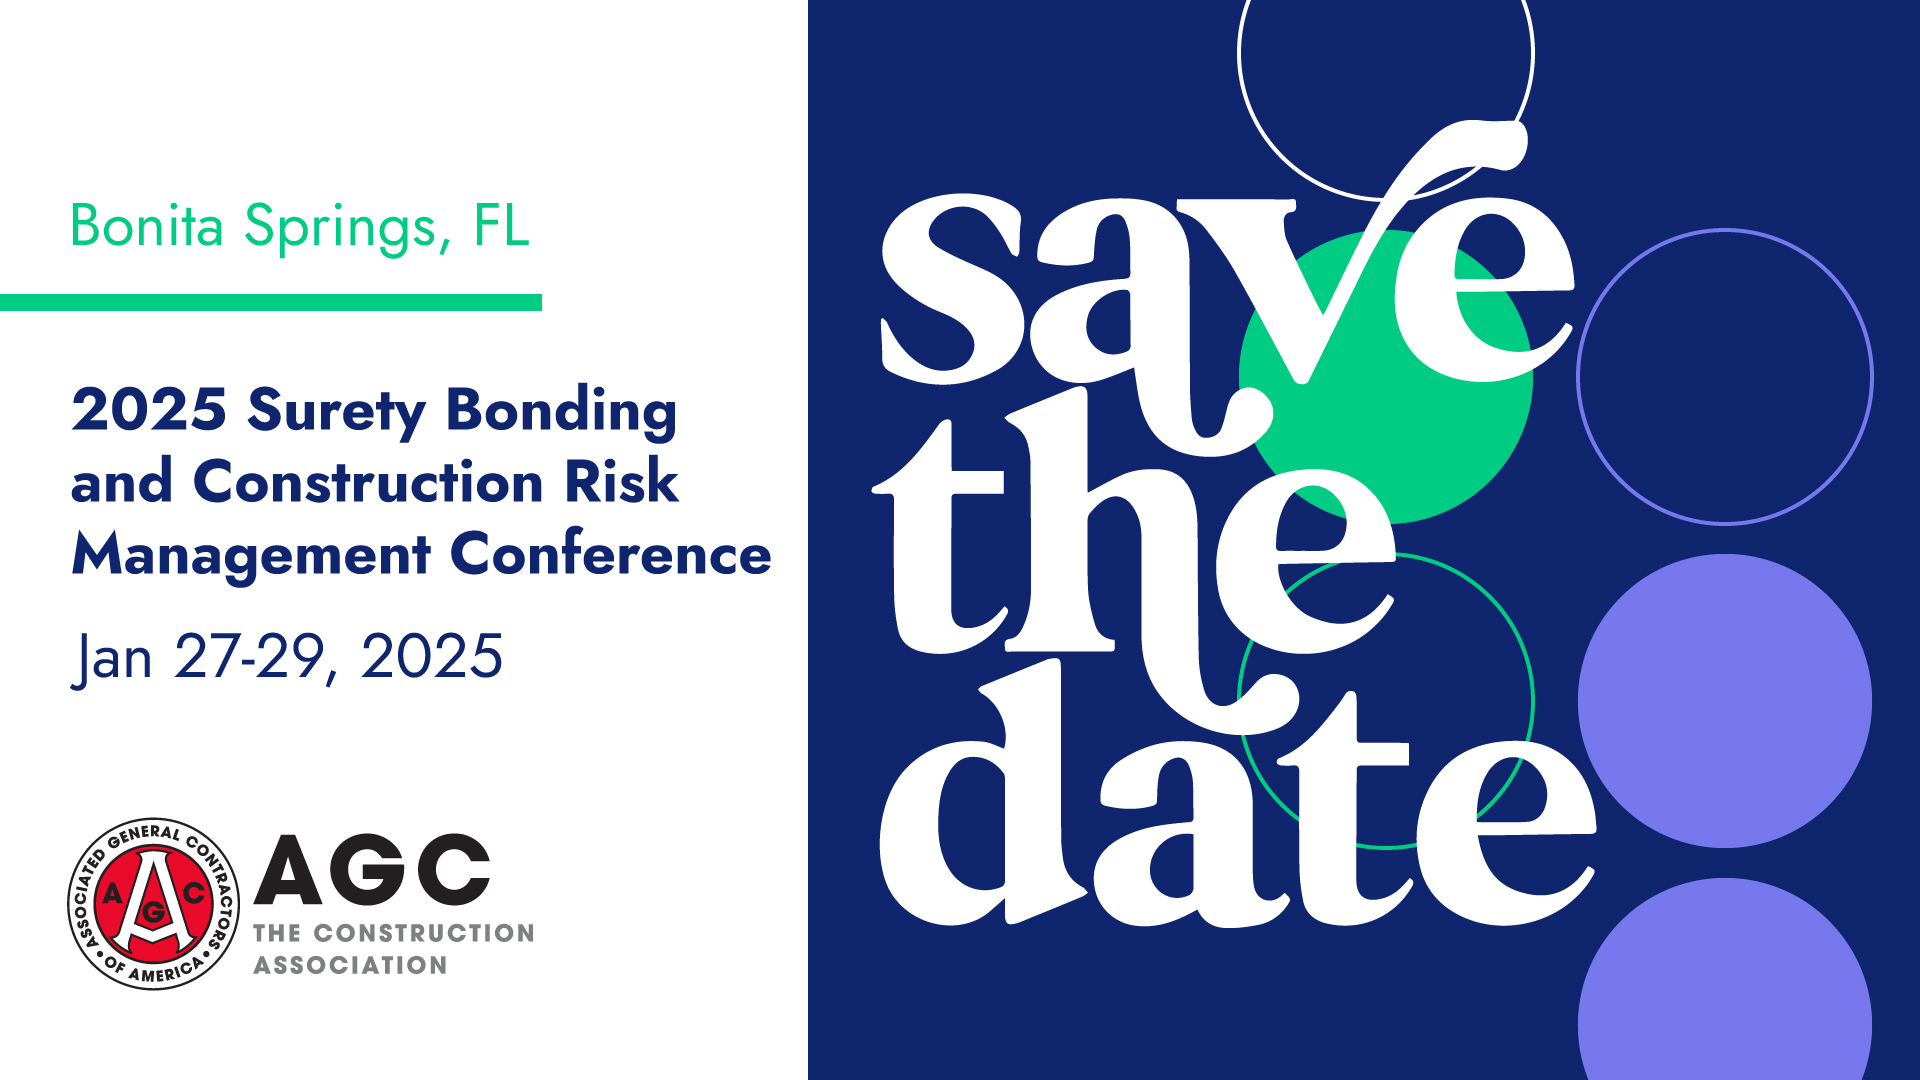 Save the Date for 2025 Conference in Bonita Springs on January 25, 2025